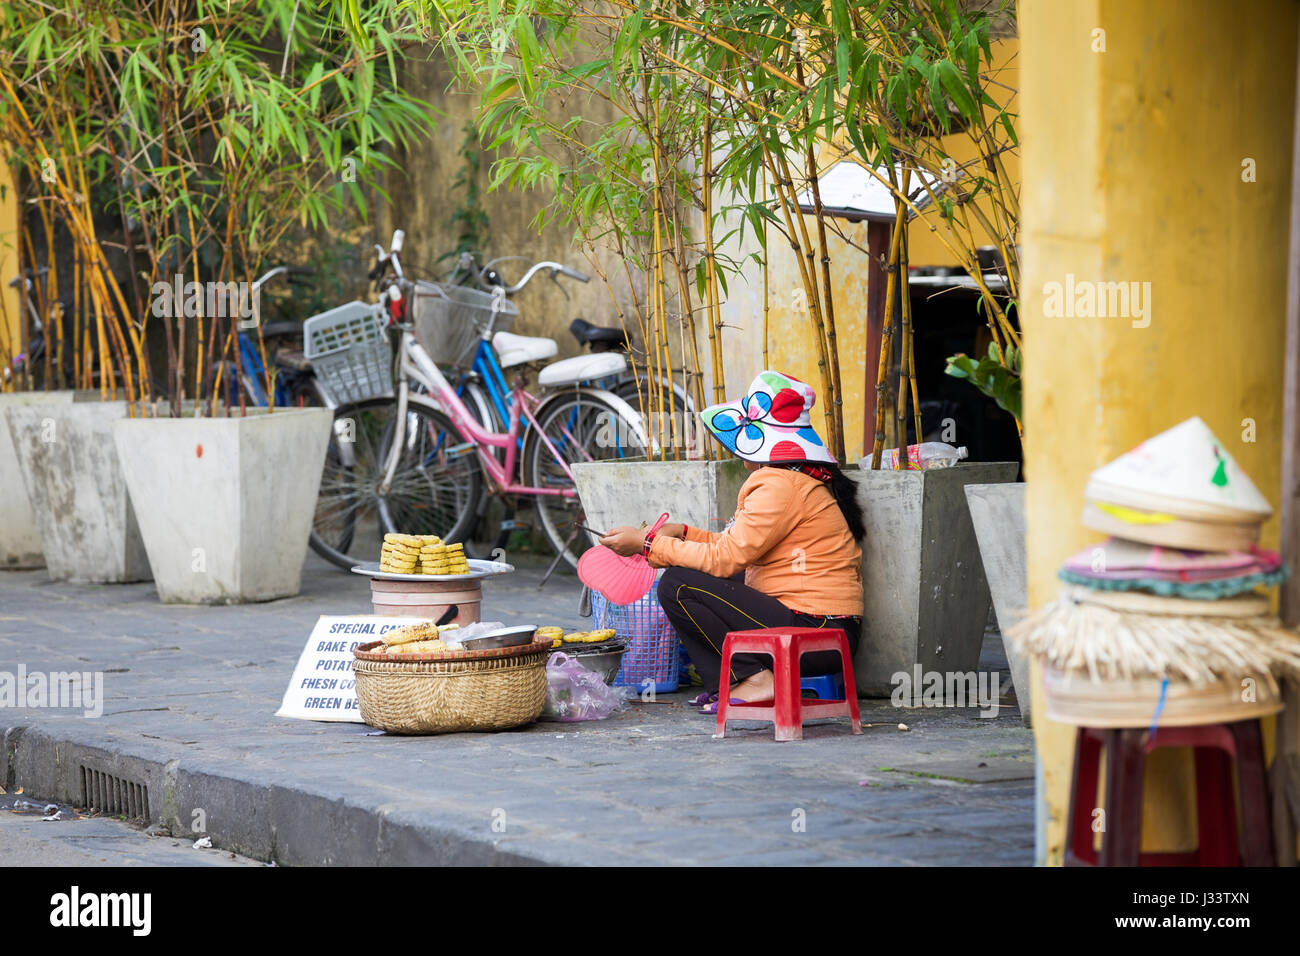 HOI AN, VIETNAM - MARCH 13: Vietnamese woman selling food on the street of Hoi An Ancient Town, UNESCO World Heritage Site on March 13, 2014 in Hoi An Stock Photo